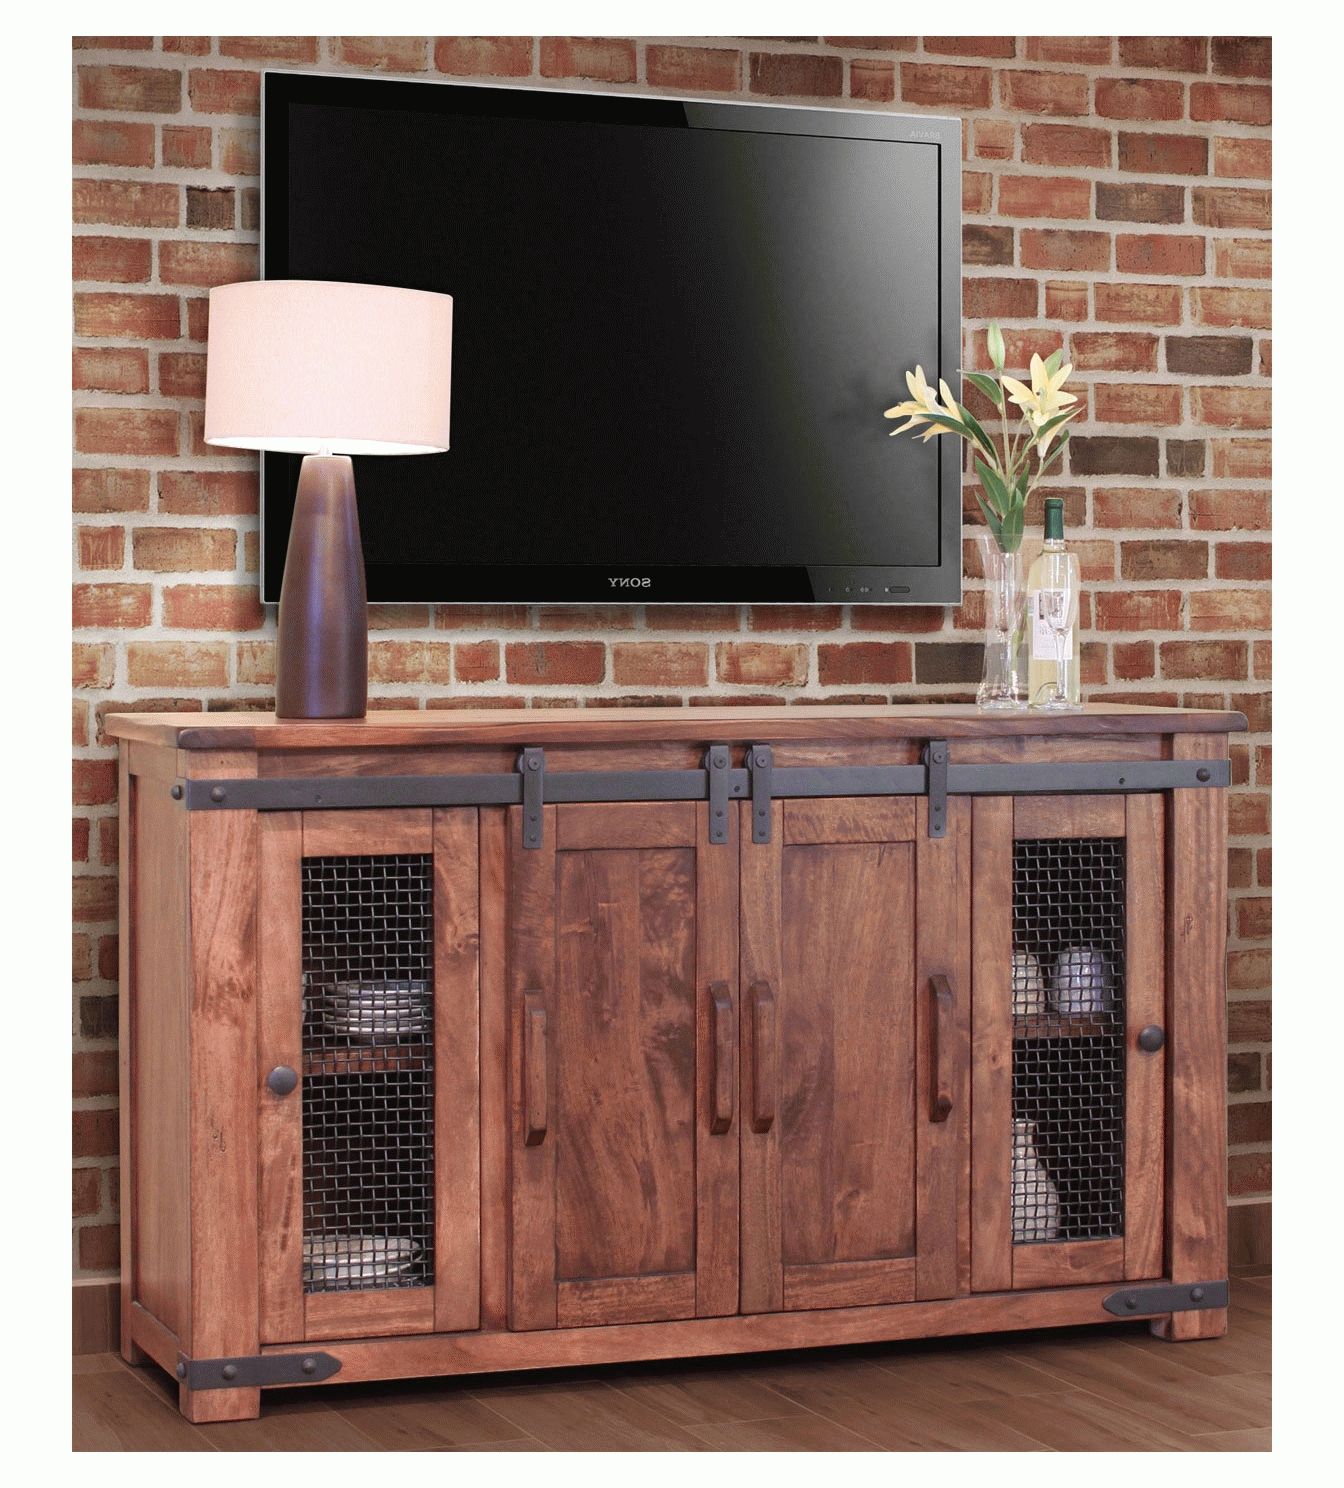 Rustic Barn Door Tv Stand, Barn Door Tv Stand, Barn Door Tv Console Throughout Rustic Tv Stands (View 3 of 15)